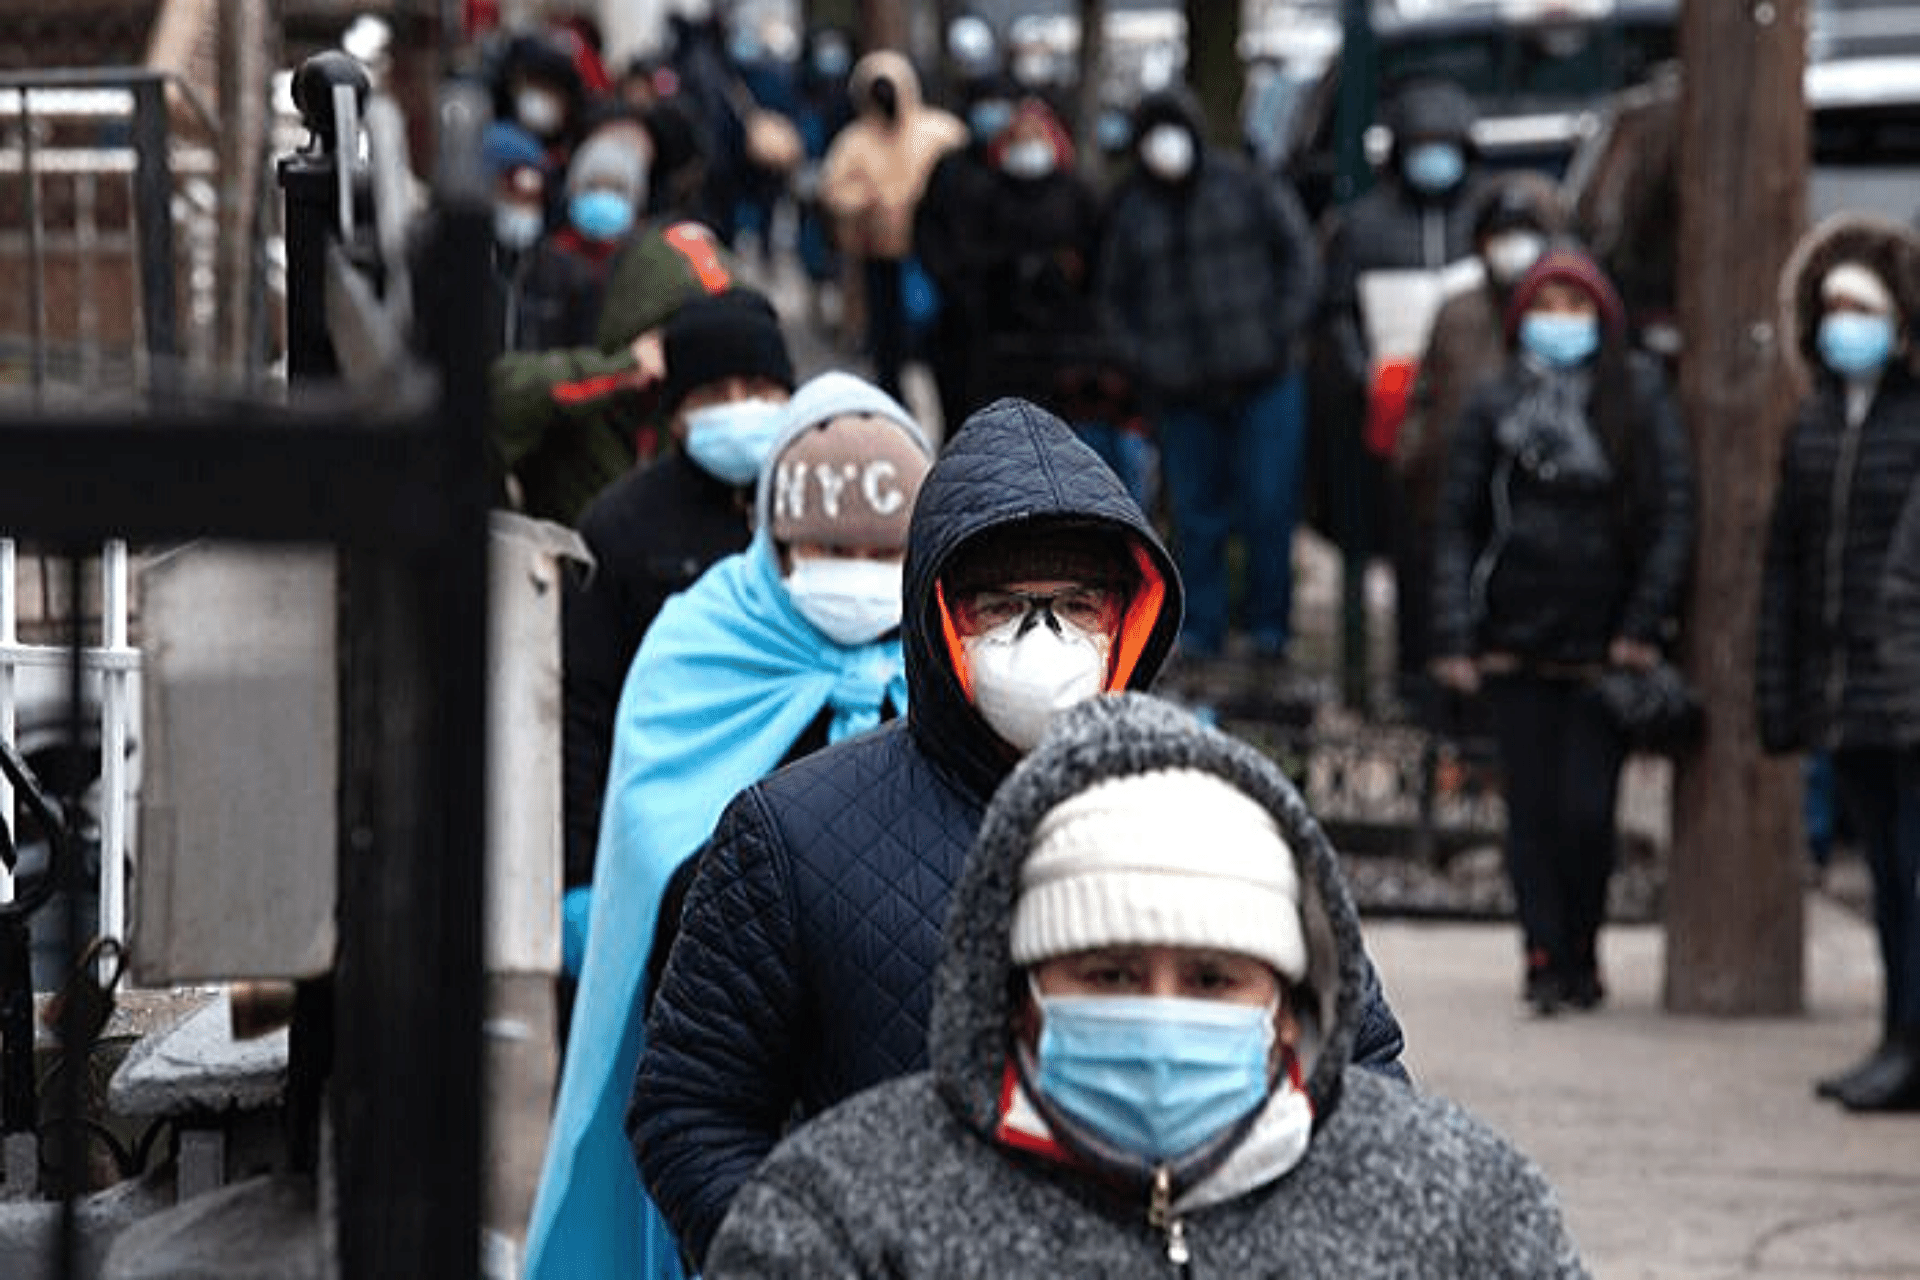 A long line of people wearing face masks